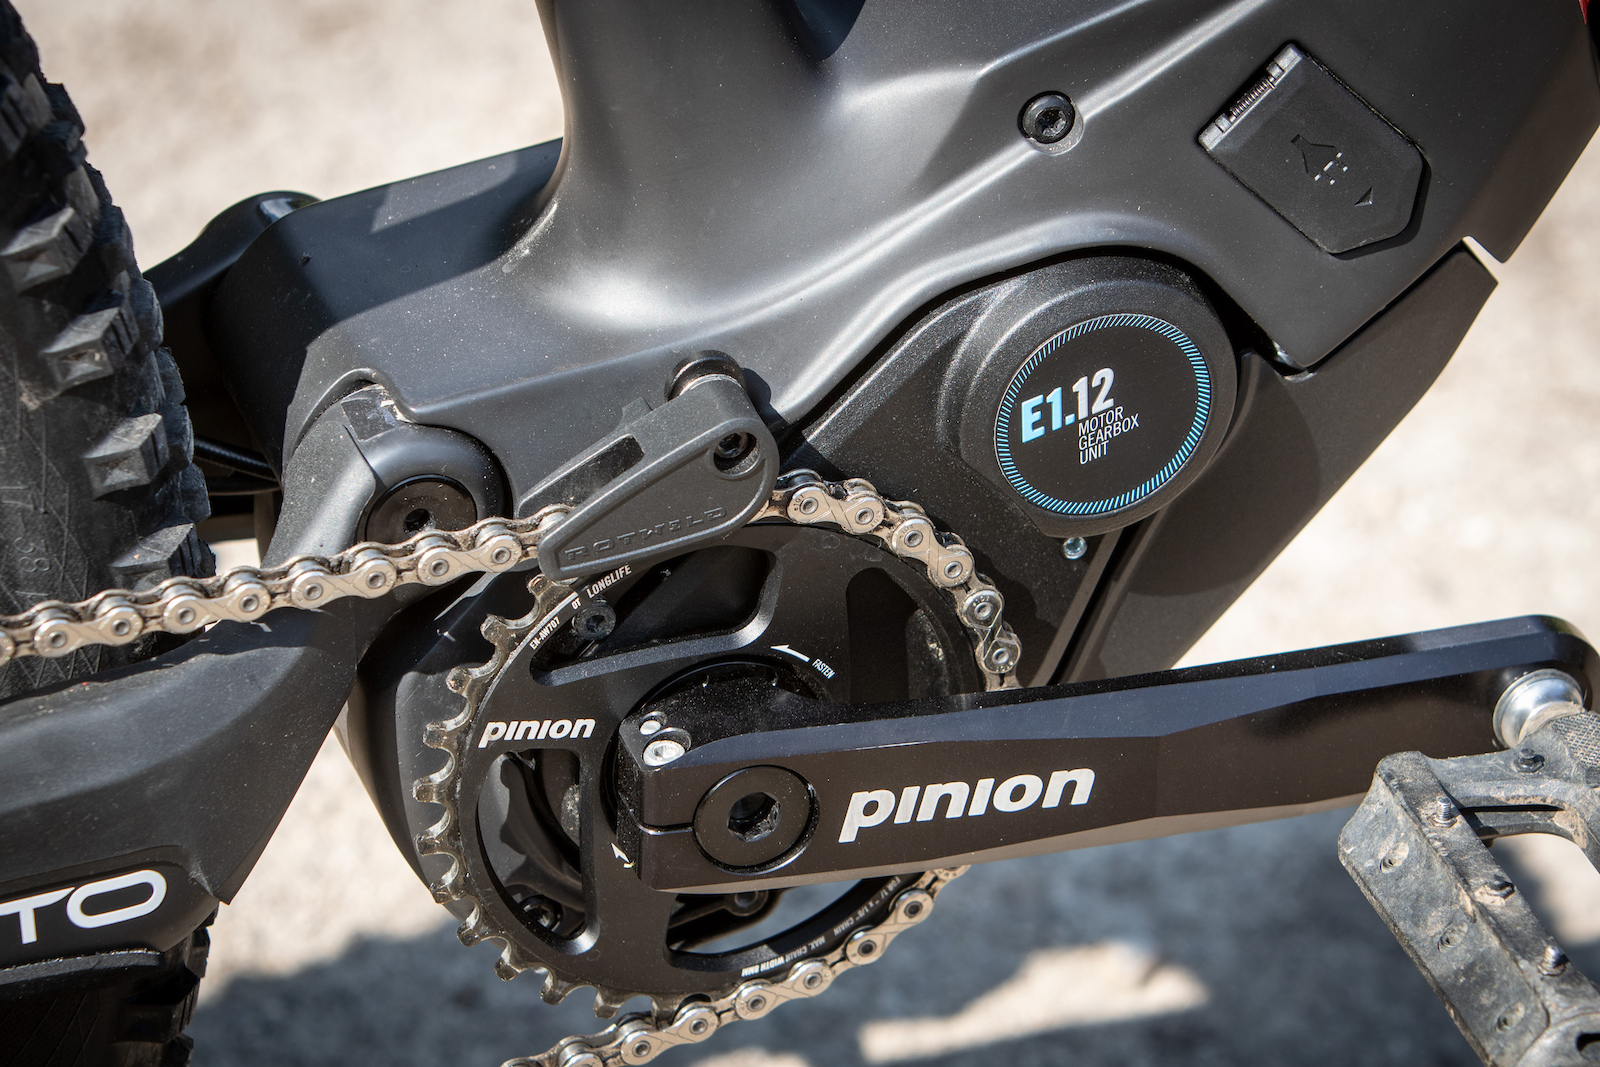 First Ride: Pinion's E-Drive System - A New Motor With an